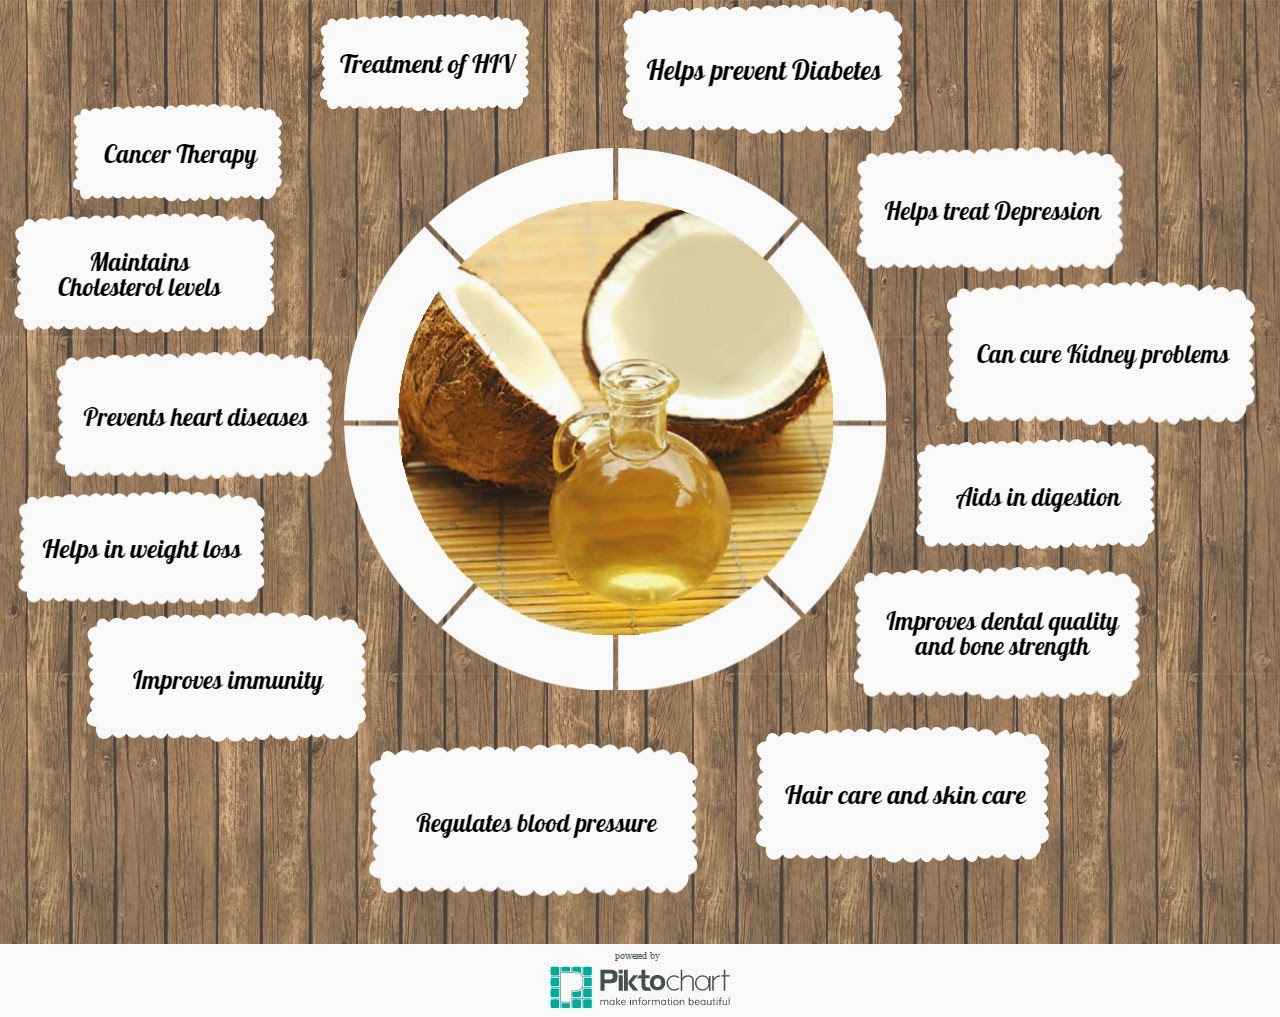 30 Days To A Clean House 14 Must Know Health Benefits Of Coconut Oil